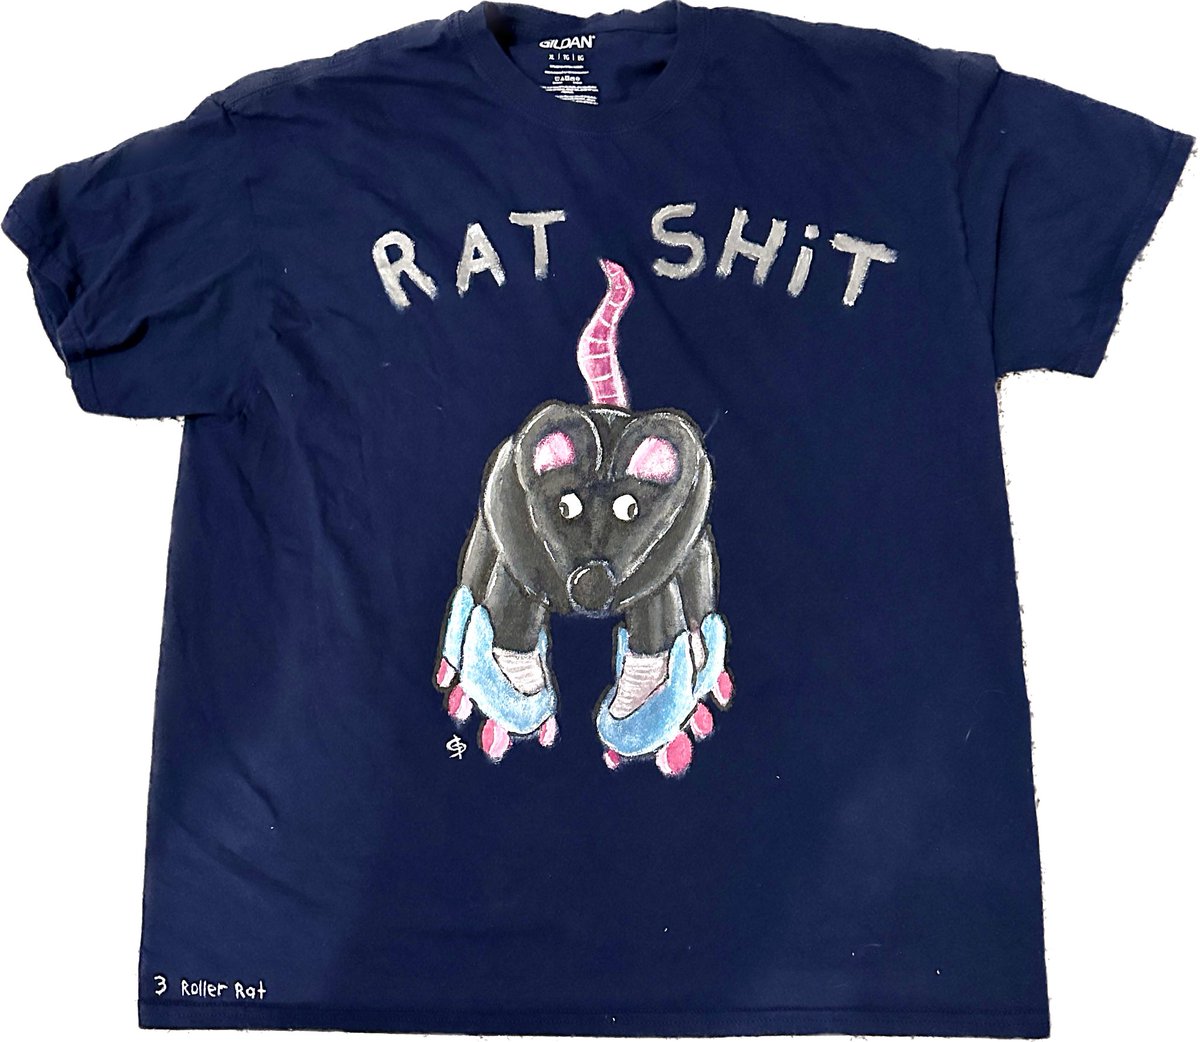 For Sale
“ROLLER RAT”
$50 
XL
The 3rd Shirt in the series
Every shirt increases in price by $10

#ratshit #shirts #clothing #streetwear #rat #rollerderby #skates #skaterat #handpainted #art #artist #nashville #nashvilleart #streetart